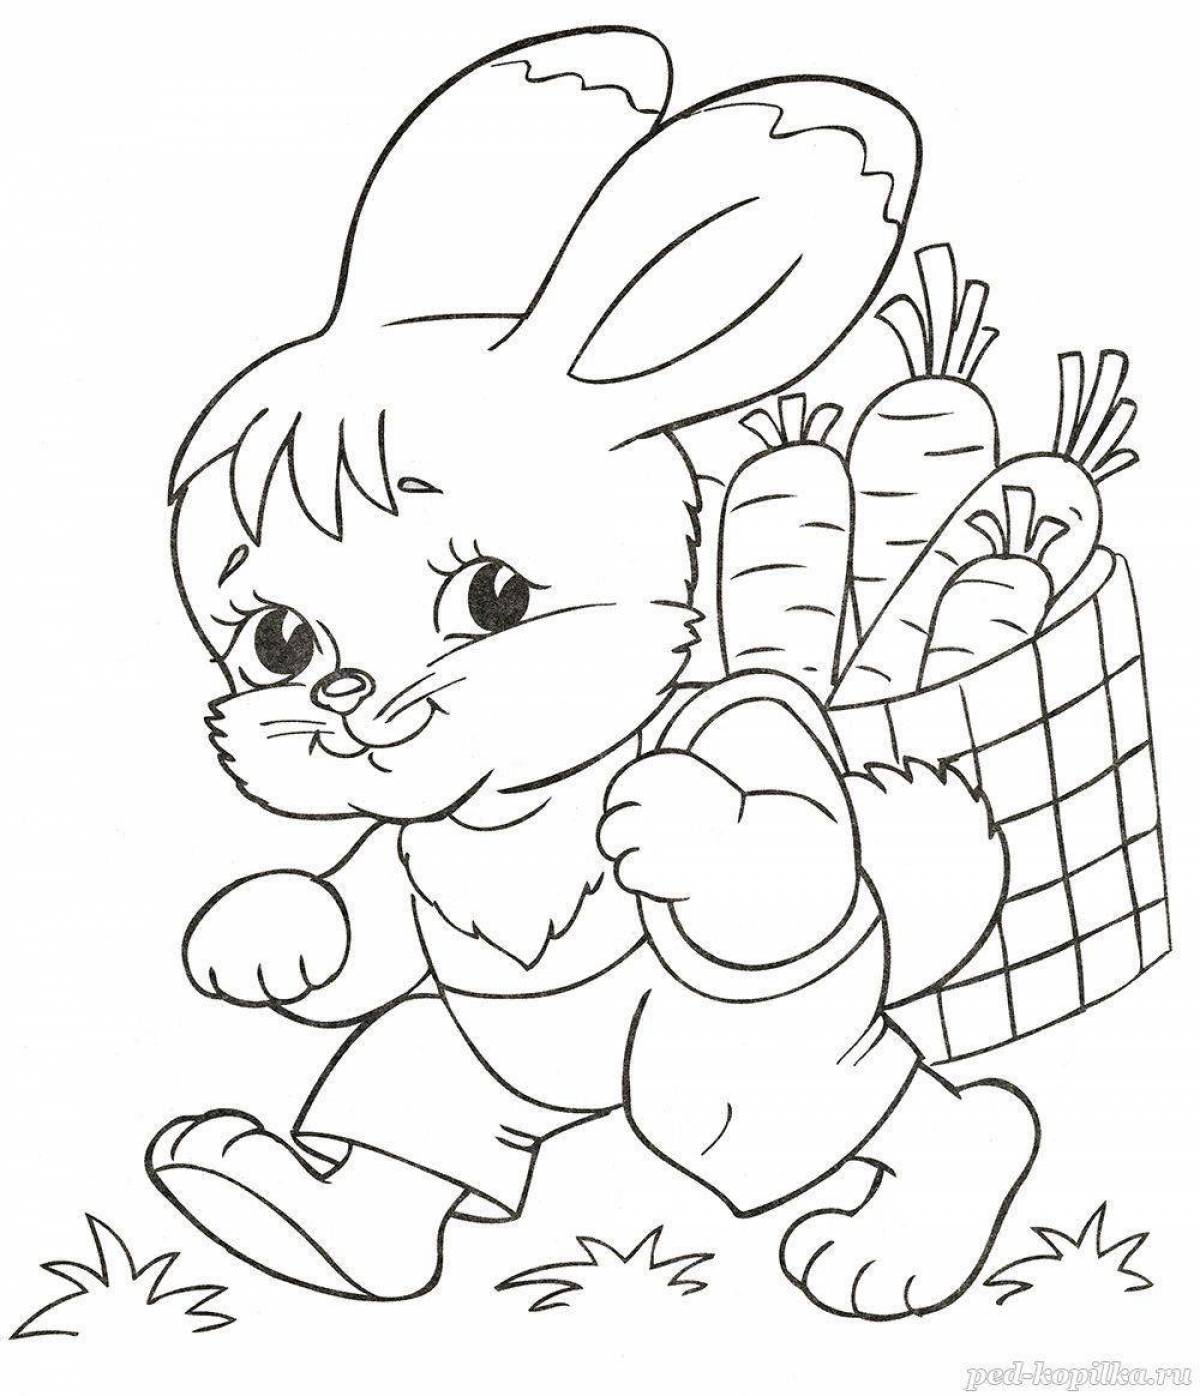 Adorable hare coloring book for kids 3-4 years old